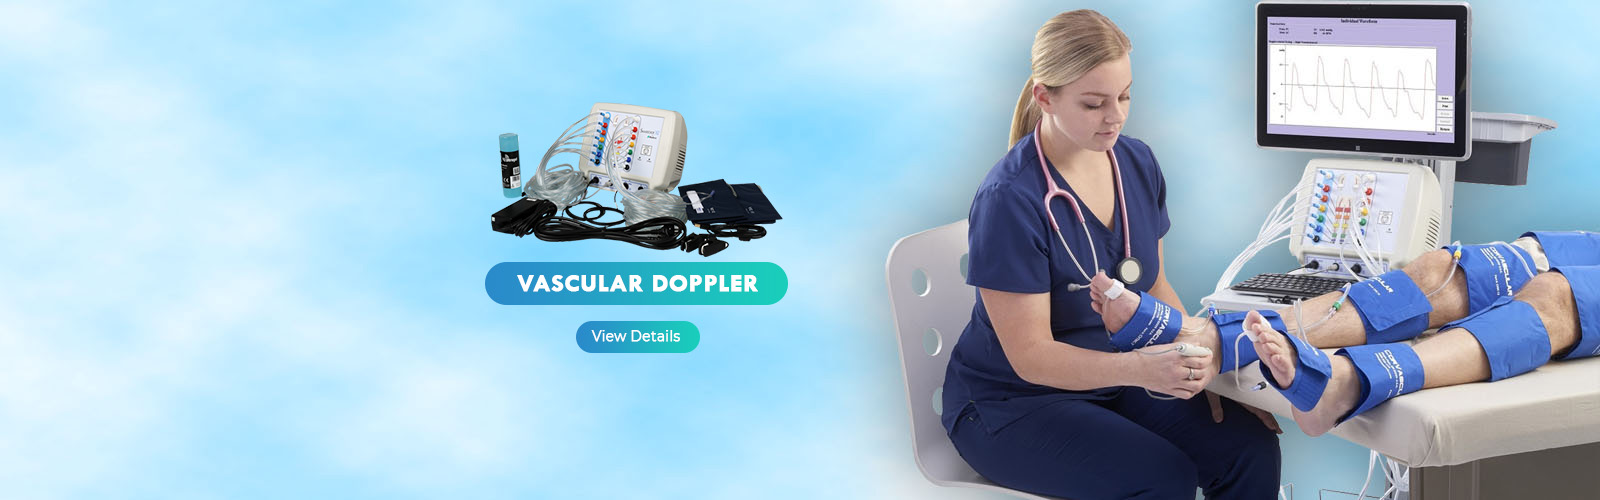 Home - Diabetic Foot Care Products | Surgical Doppler Probe Supplier